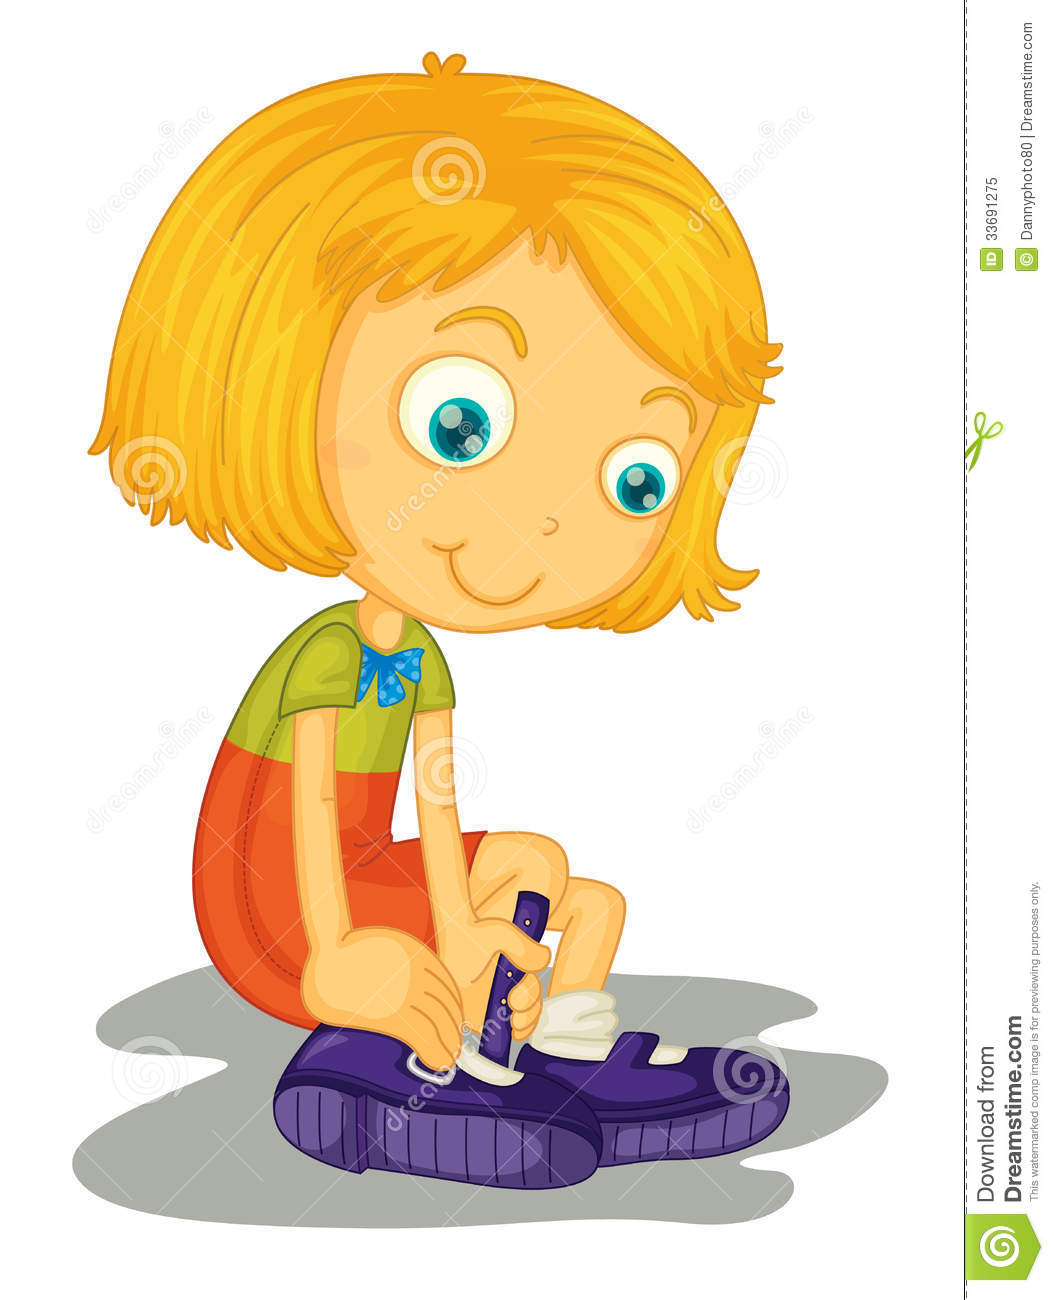 Girl Buckles Shoes Royalty Free Stock Photo   Image  33691275